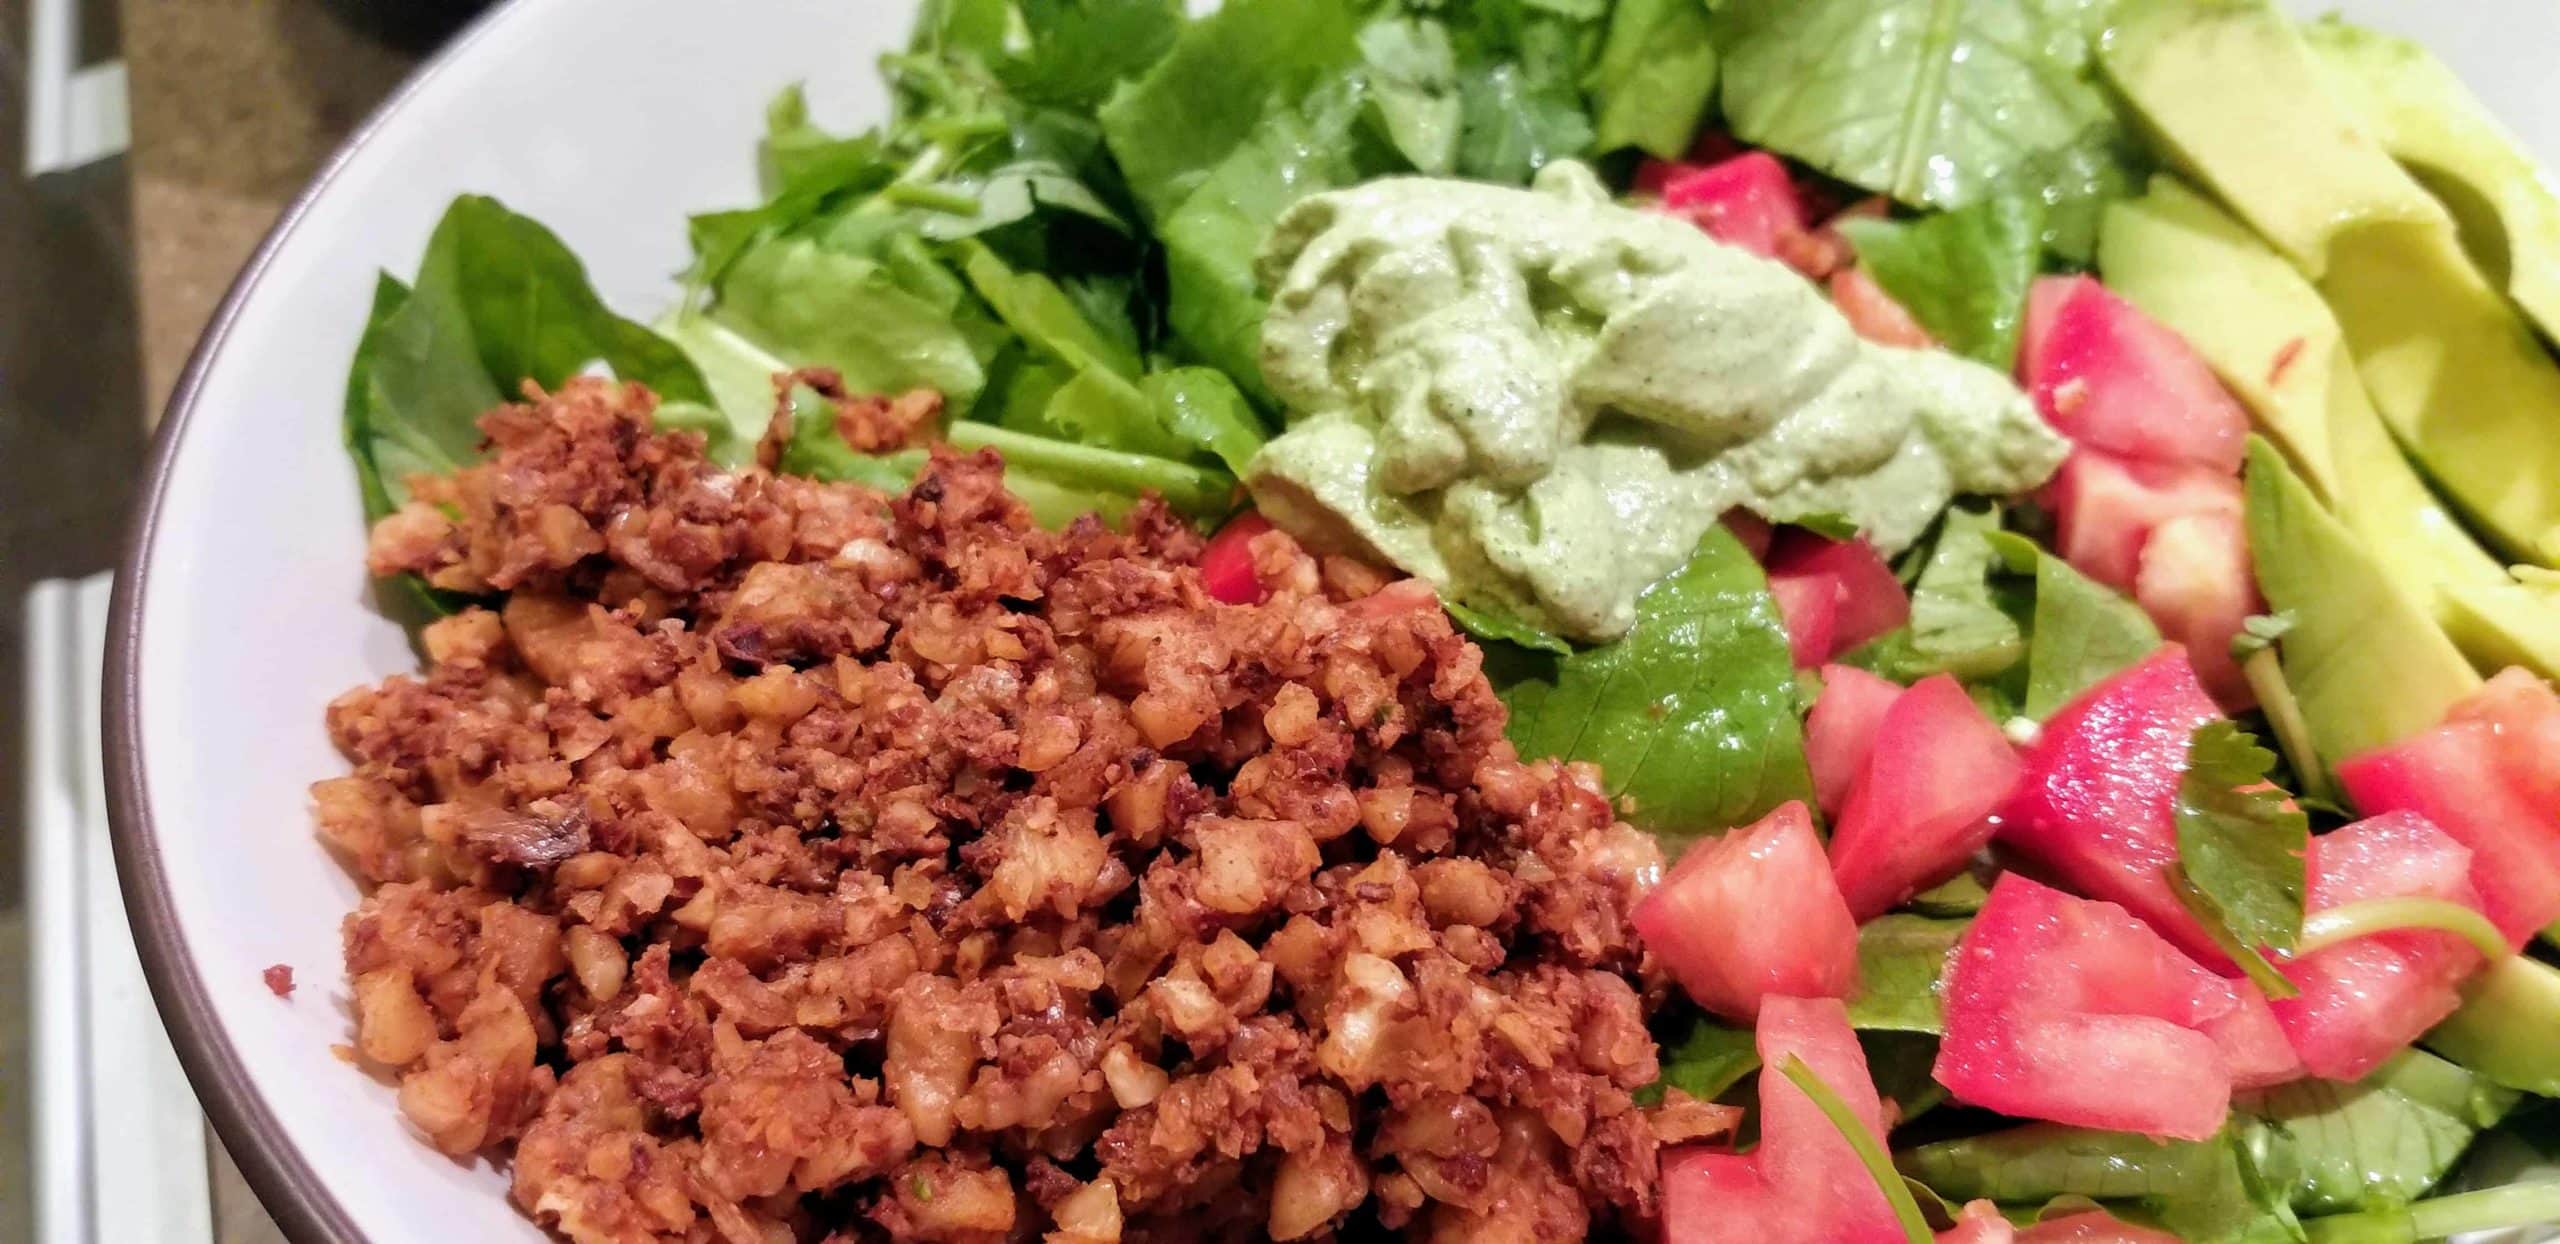 Cancer-fighting low-carb, raw vegan taco salad with walnut meat and cashew crema